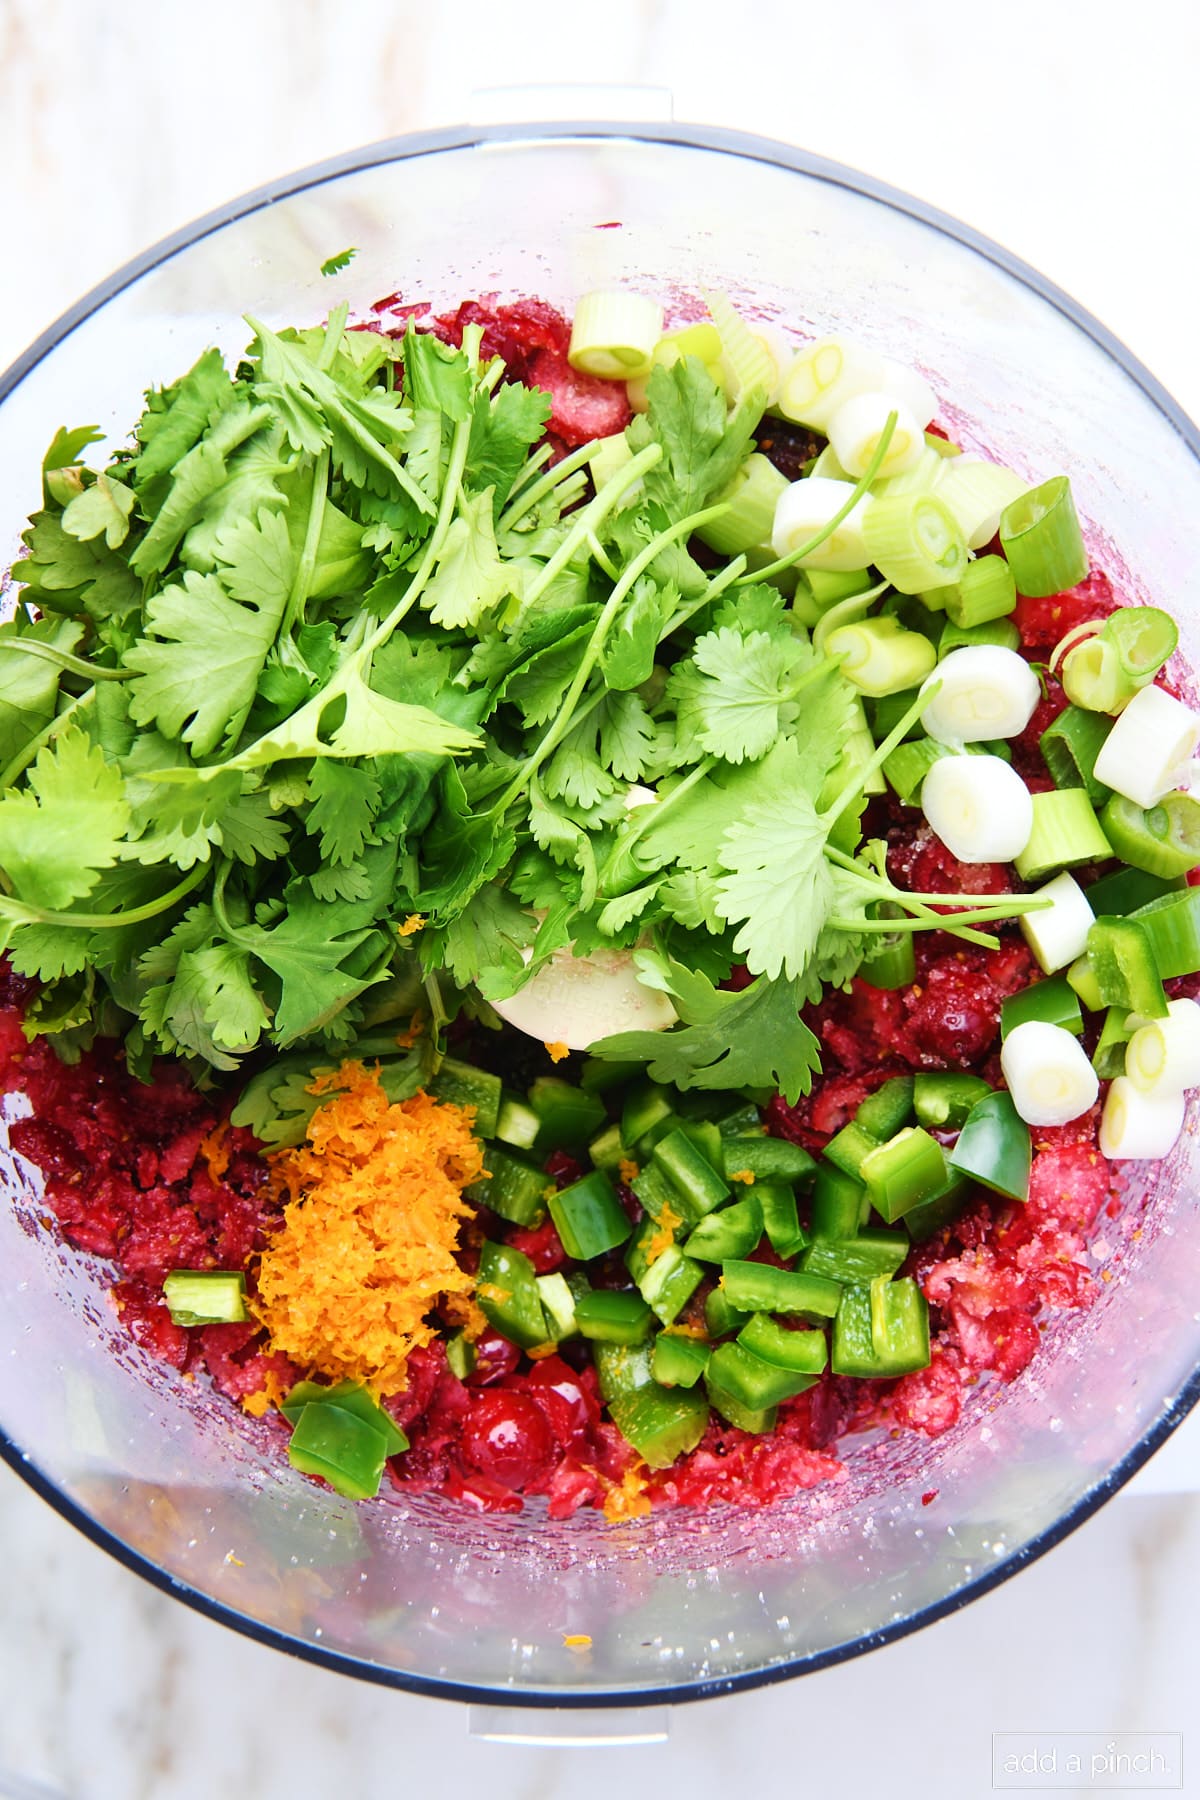 Food processor with cranberries, orange zest, chopped green onion, jalapeno, and cilantro ready to blend.